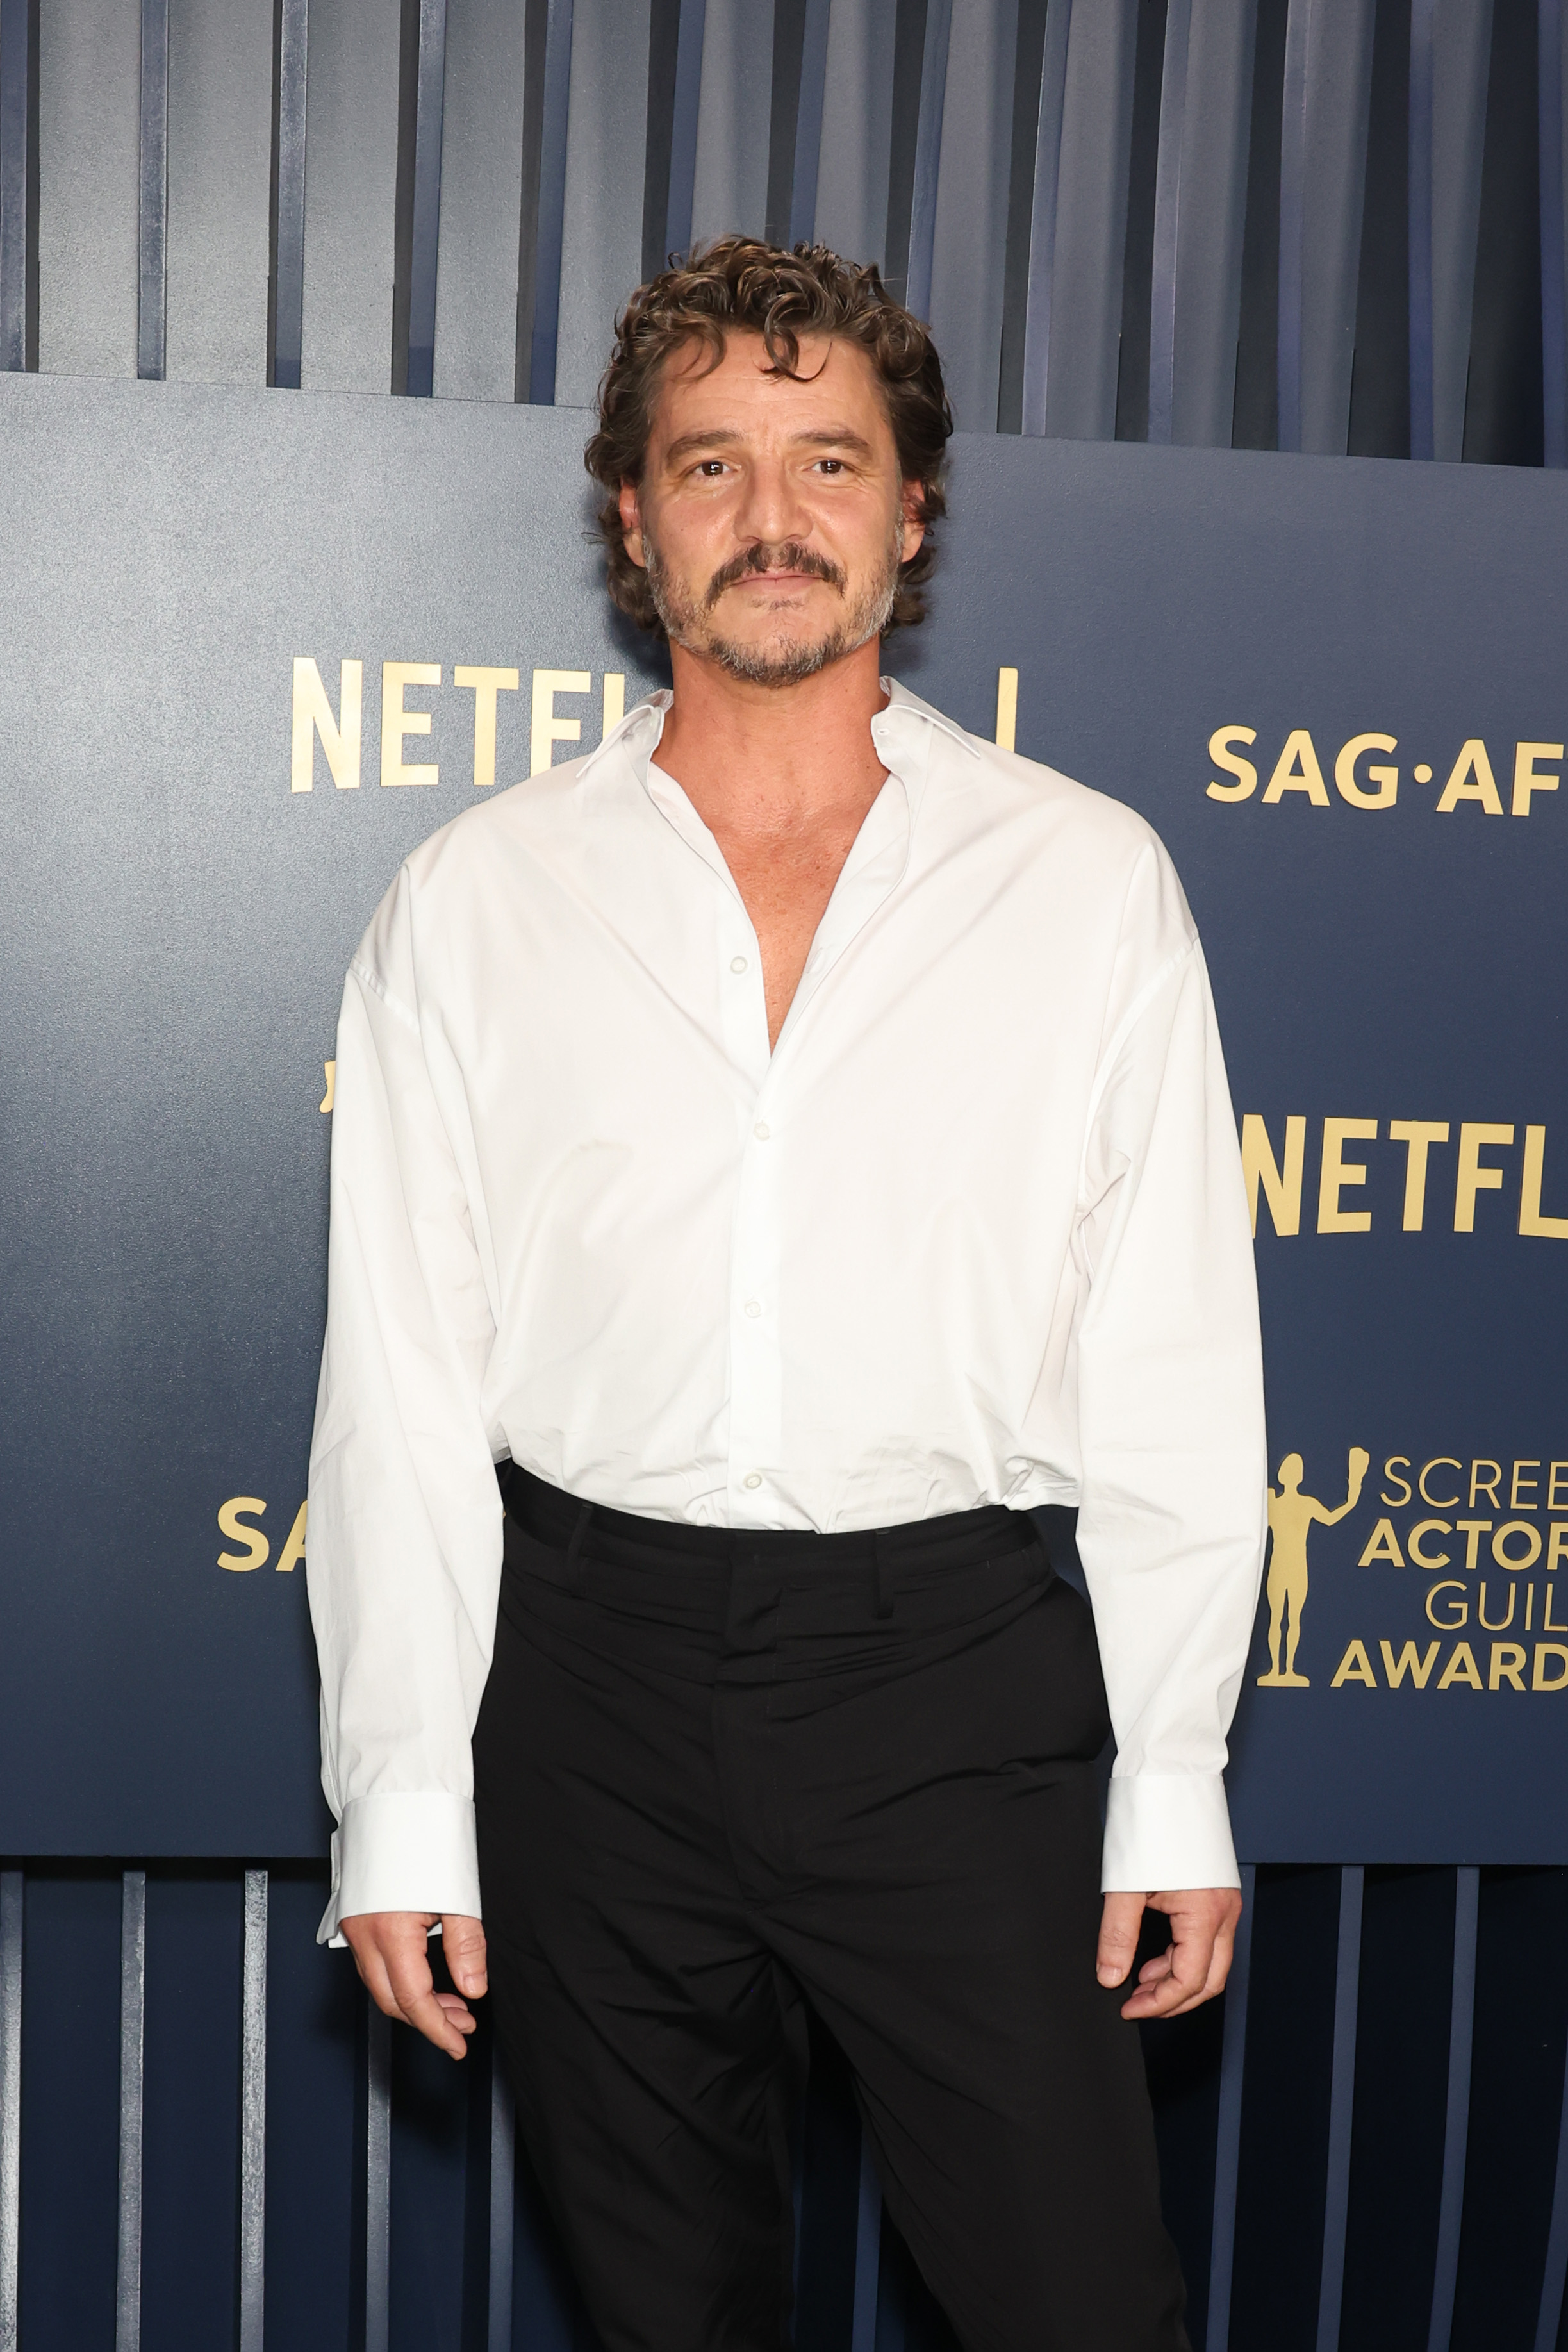 Pedro Pascal stands smiling in a semi-formal outfit with an unbuttoned white shirt and black trousers at a press event